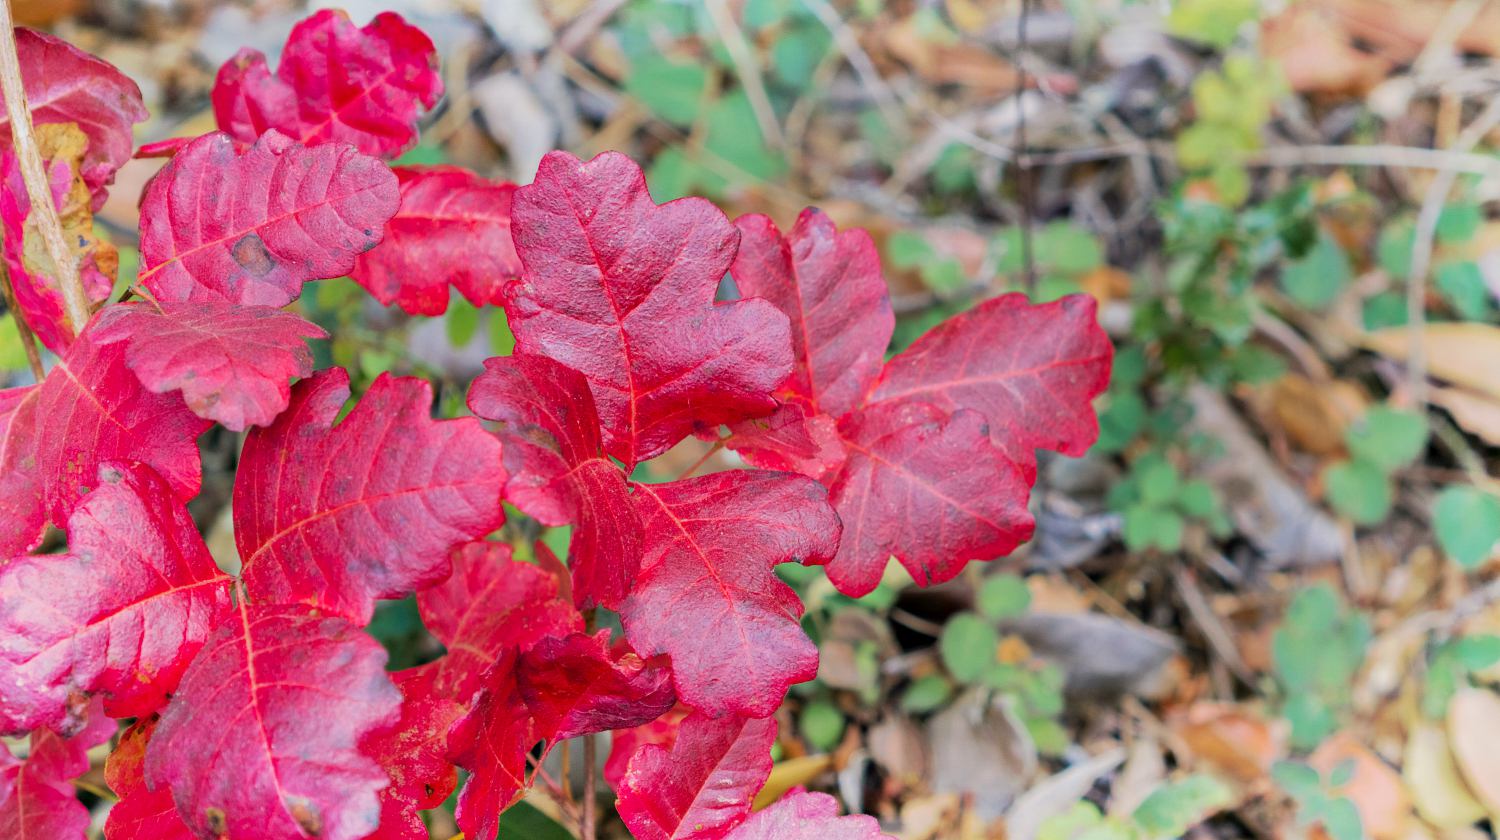 Red poison oak (Toxicodendron diversilobum) leaves | Home Remedies For Poison Ivy, Oak, and Sumac | Featured